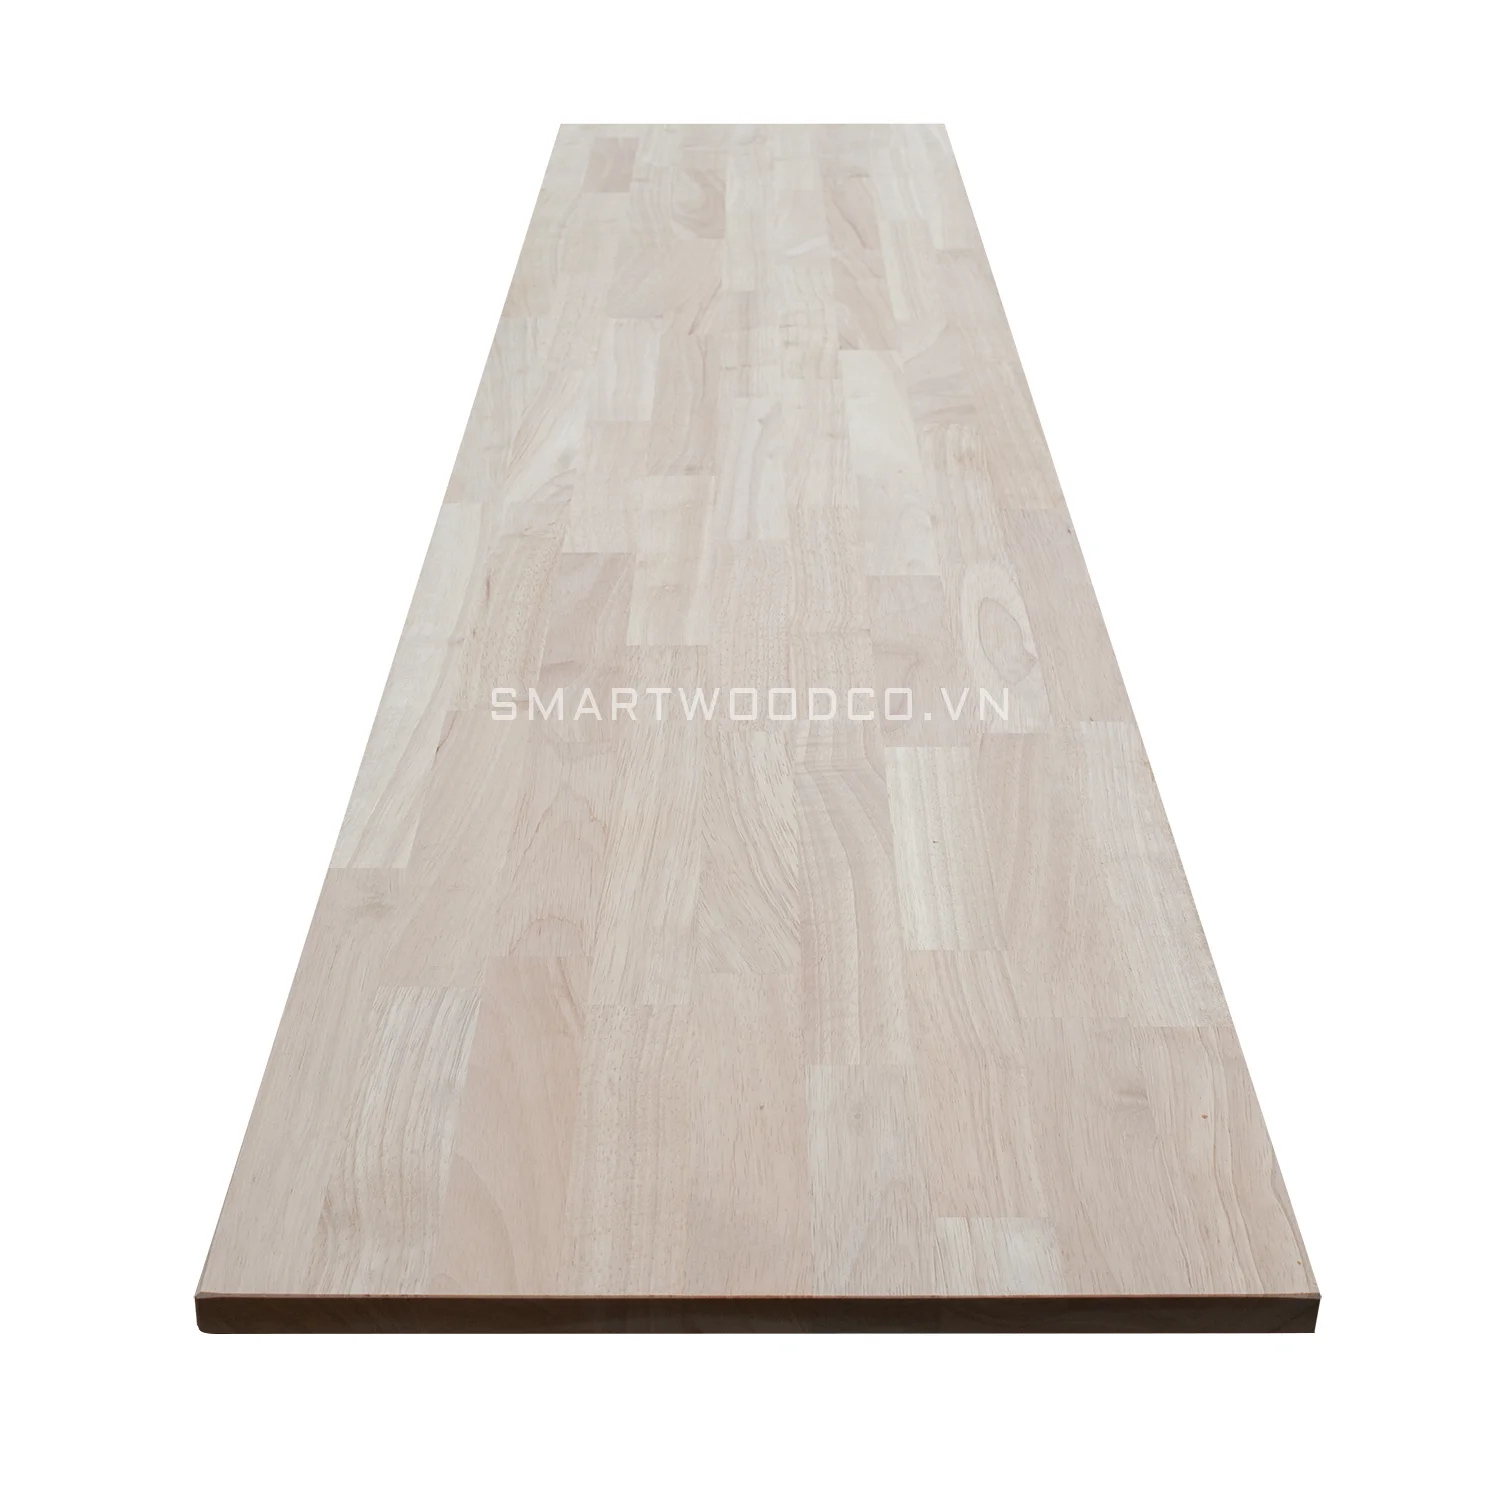 SMARTWOOD RUBBER WOOD FINGER JOINT BOARD WITH CHEAPEST PRICE  FROM VIETNAM NATURAL COLOR